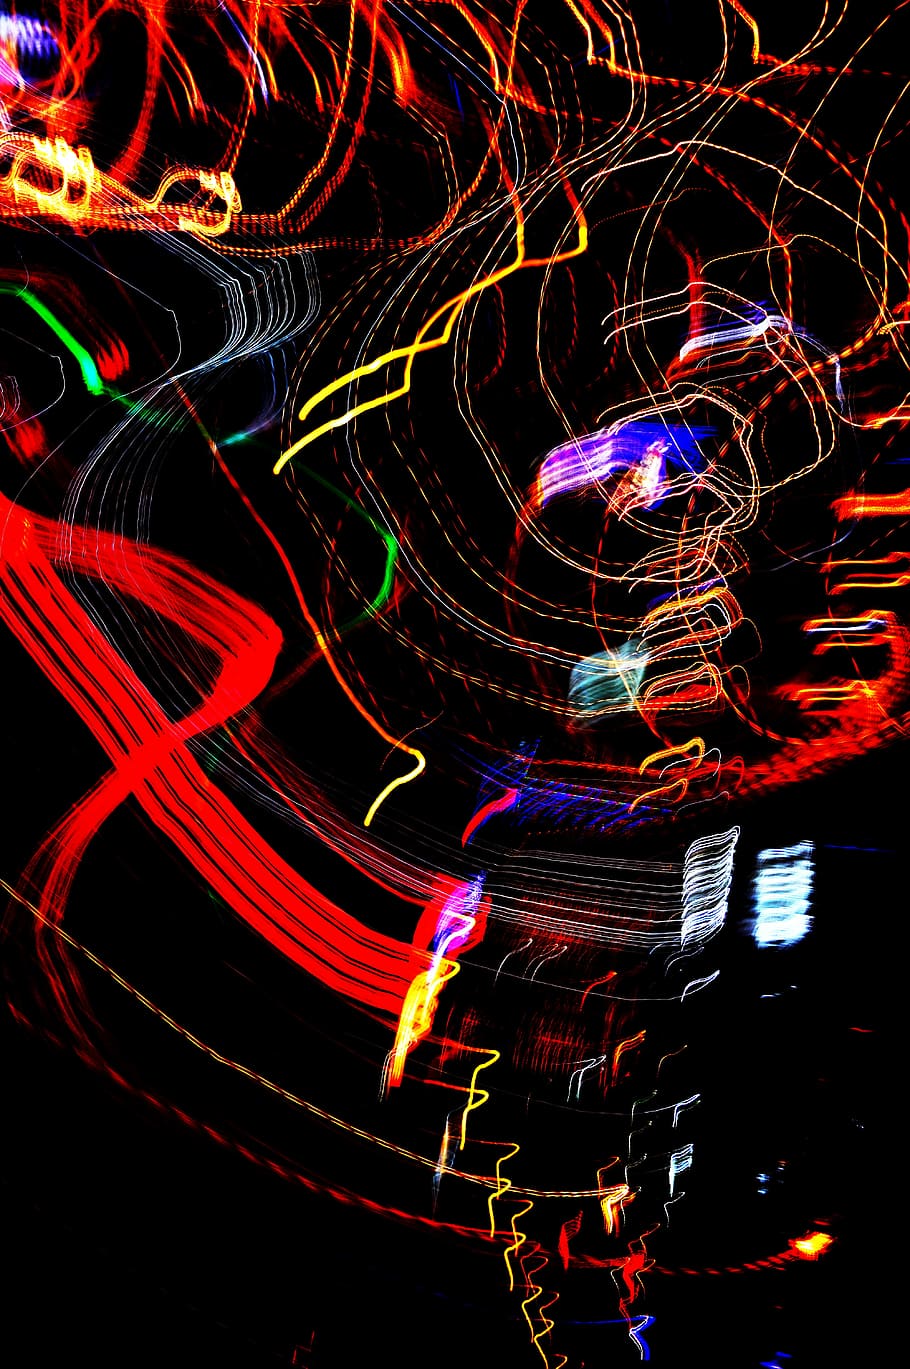 night view, night, chaos, line, city, confused, illuminated, multi colored, long exposure, glowing